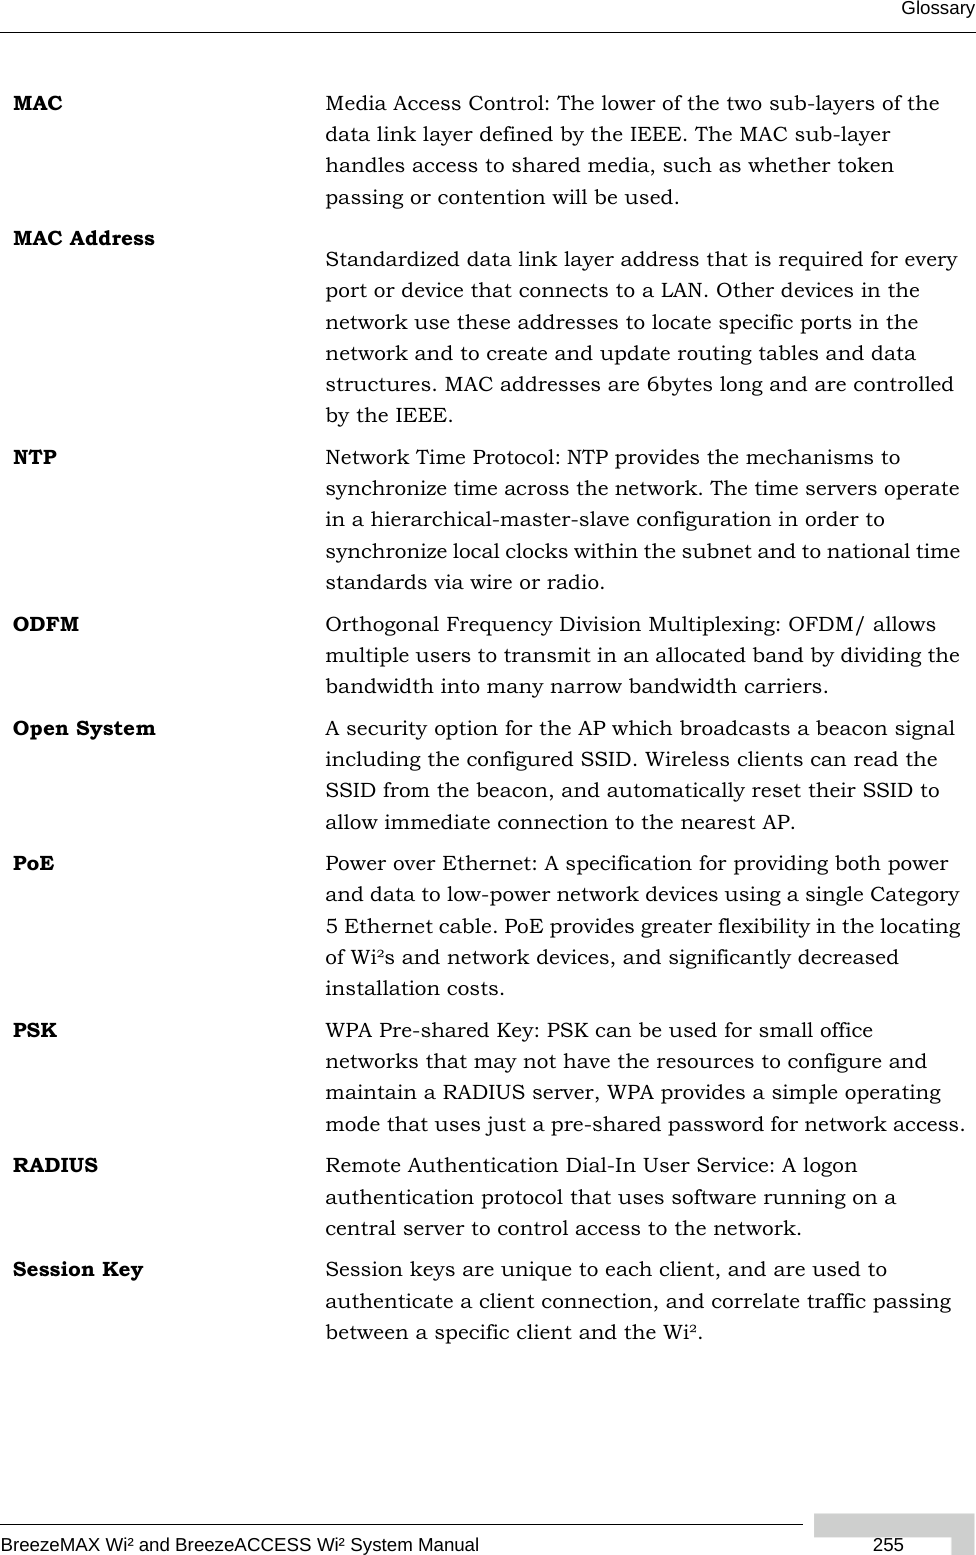 GlossaryBreezeMAX Wi² and BreezeACCESS Wi² System Manual 255MAC Media Access Control: The lower of the two sub-layers of the data link layer defined by the IEEE. The MAC sub-layer handles access to shared media, such as whether token passing or contention will be used.MAC AddressStandardized data link layer address that is required for every port or device that connects to a LAN. Other devices in the network use these addresses to locate specific ports in the network and to create and update routing tables and data structures. MAC addresses are 6bytes long and are controlled by the IEEE.NTP Network Time Protocol: NTP provides the mechanisms to synchronize time across the network. The time servers operate in a hierarchical-master-slave configuration in order to synchronize local clocks within the subnet and to national time standards via wire or radio.ODFM Orthogonal Frequency Division Multiplexing: OFDM/ allows multiple users to transmit in an allocated band by dividing the bandwidth into many narrow bandwidth carriers.Open System A security option for the AP which broadcasts a beacon signal including the configured SSID. Wireless clients can read the SSID from the beacon, and automatically reset their SSID to allow immediate connection to the nearest AP.PoE Power over Ethernet: A specification for providing both power and data to low-power network devices using a single Category 5 Ethernet cable. PoE provides greater flexibility in the locating of Wi²s and network devices, and significantly decreased installation costs. PSK WPA Pre-shared Key: PSK can be used for small office networks that may not have the resources to configure and maintain a RADIUS server, WPA provides a simple operating mode that uses just a pre-shared password for network access.RADIUS Remote Authentication Dial-In User Service: A logon authentication protocol that uses software running on a central server to control access to the network.Session Key Session keys are unique to each client, and are used to authenticate a client connection, and correlate traffic passing between a specific client and the Wi².